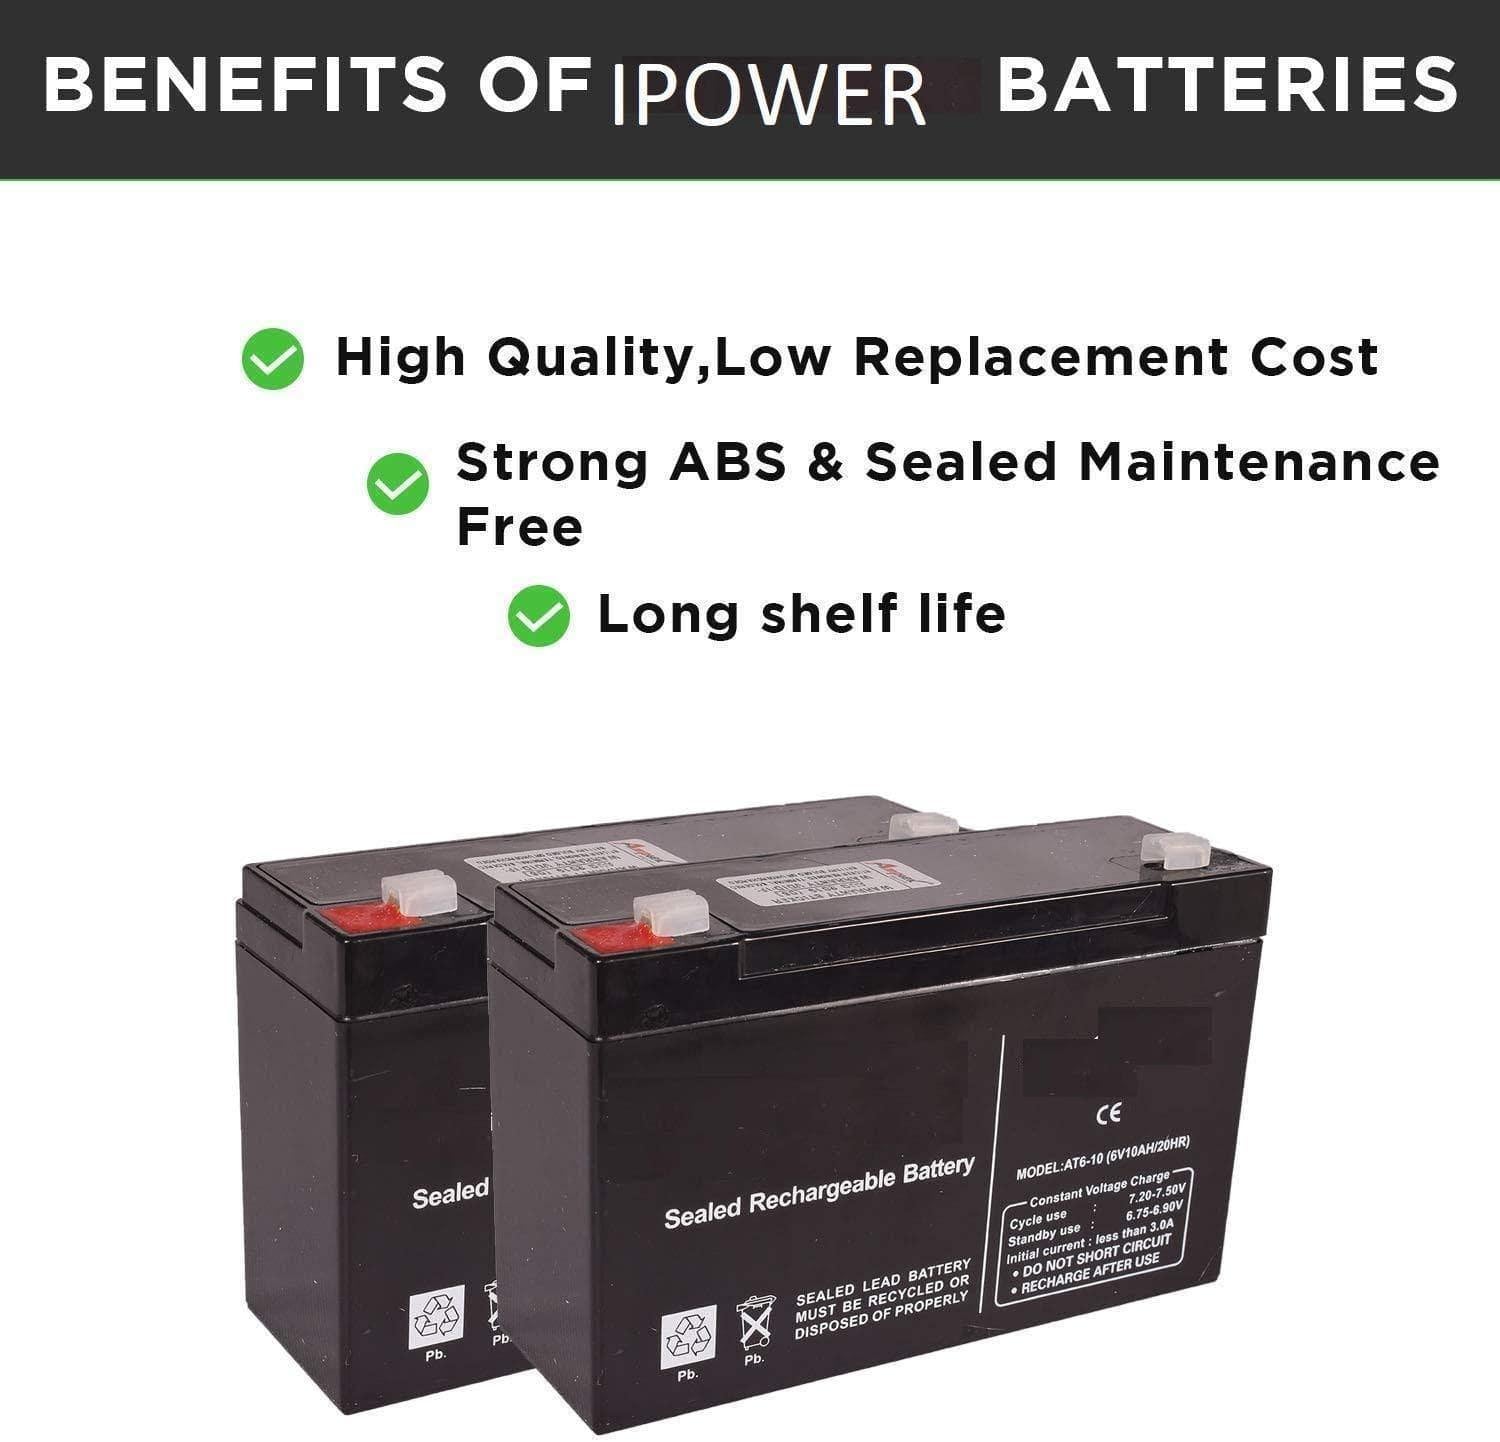 iPower 6V 10AH Rechargeable VRLA Battery for Toys & Scientific Projects-Rechargeable Batteries-dealsplant